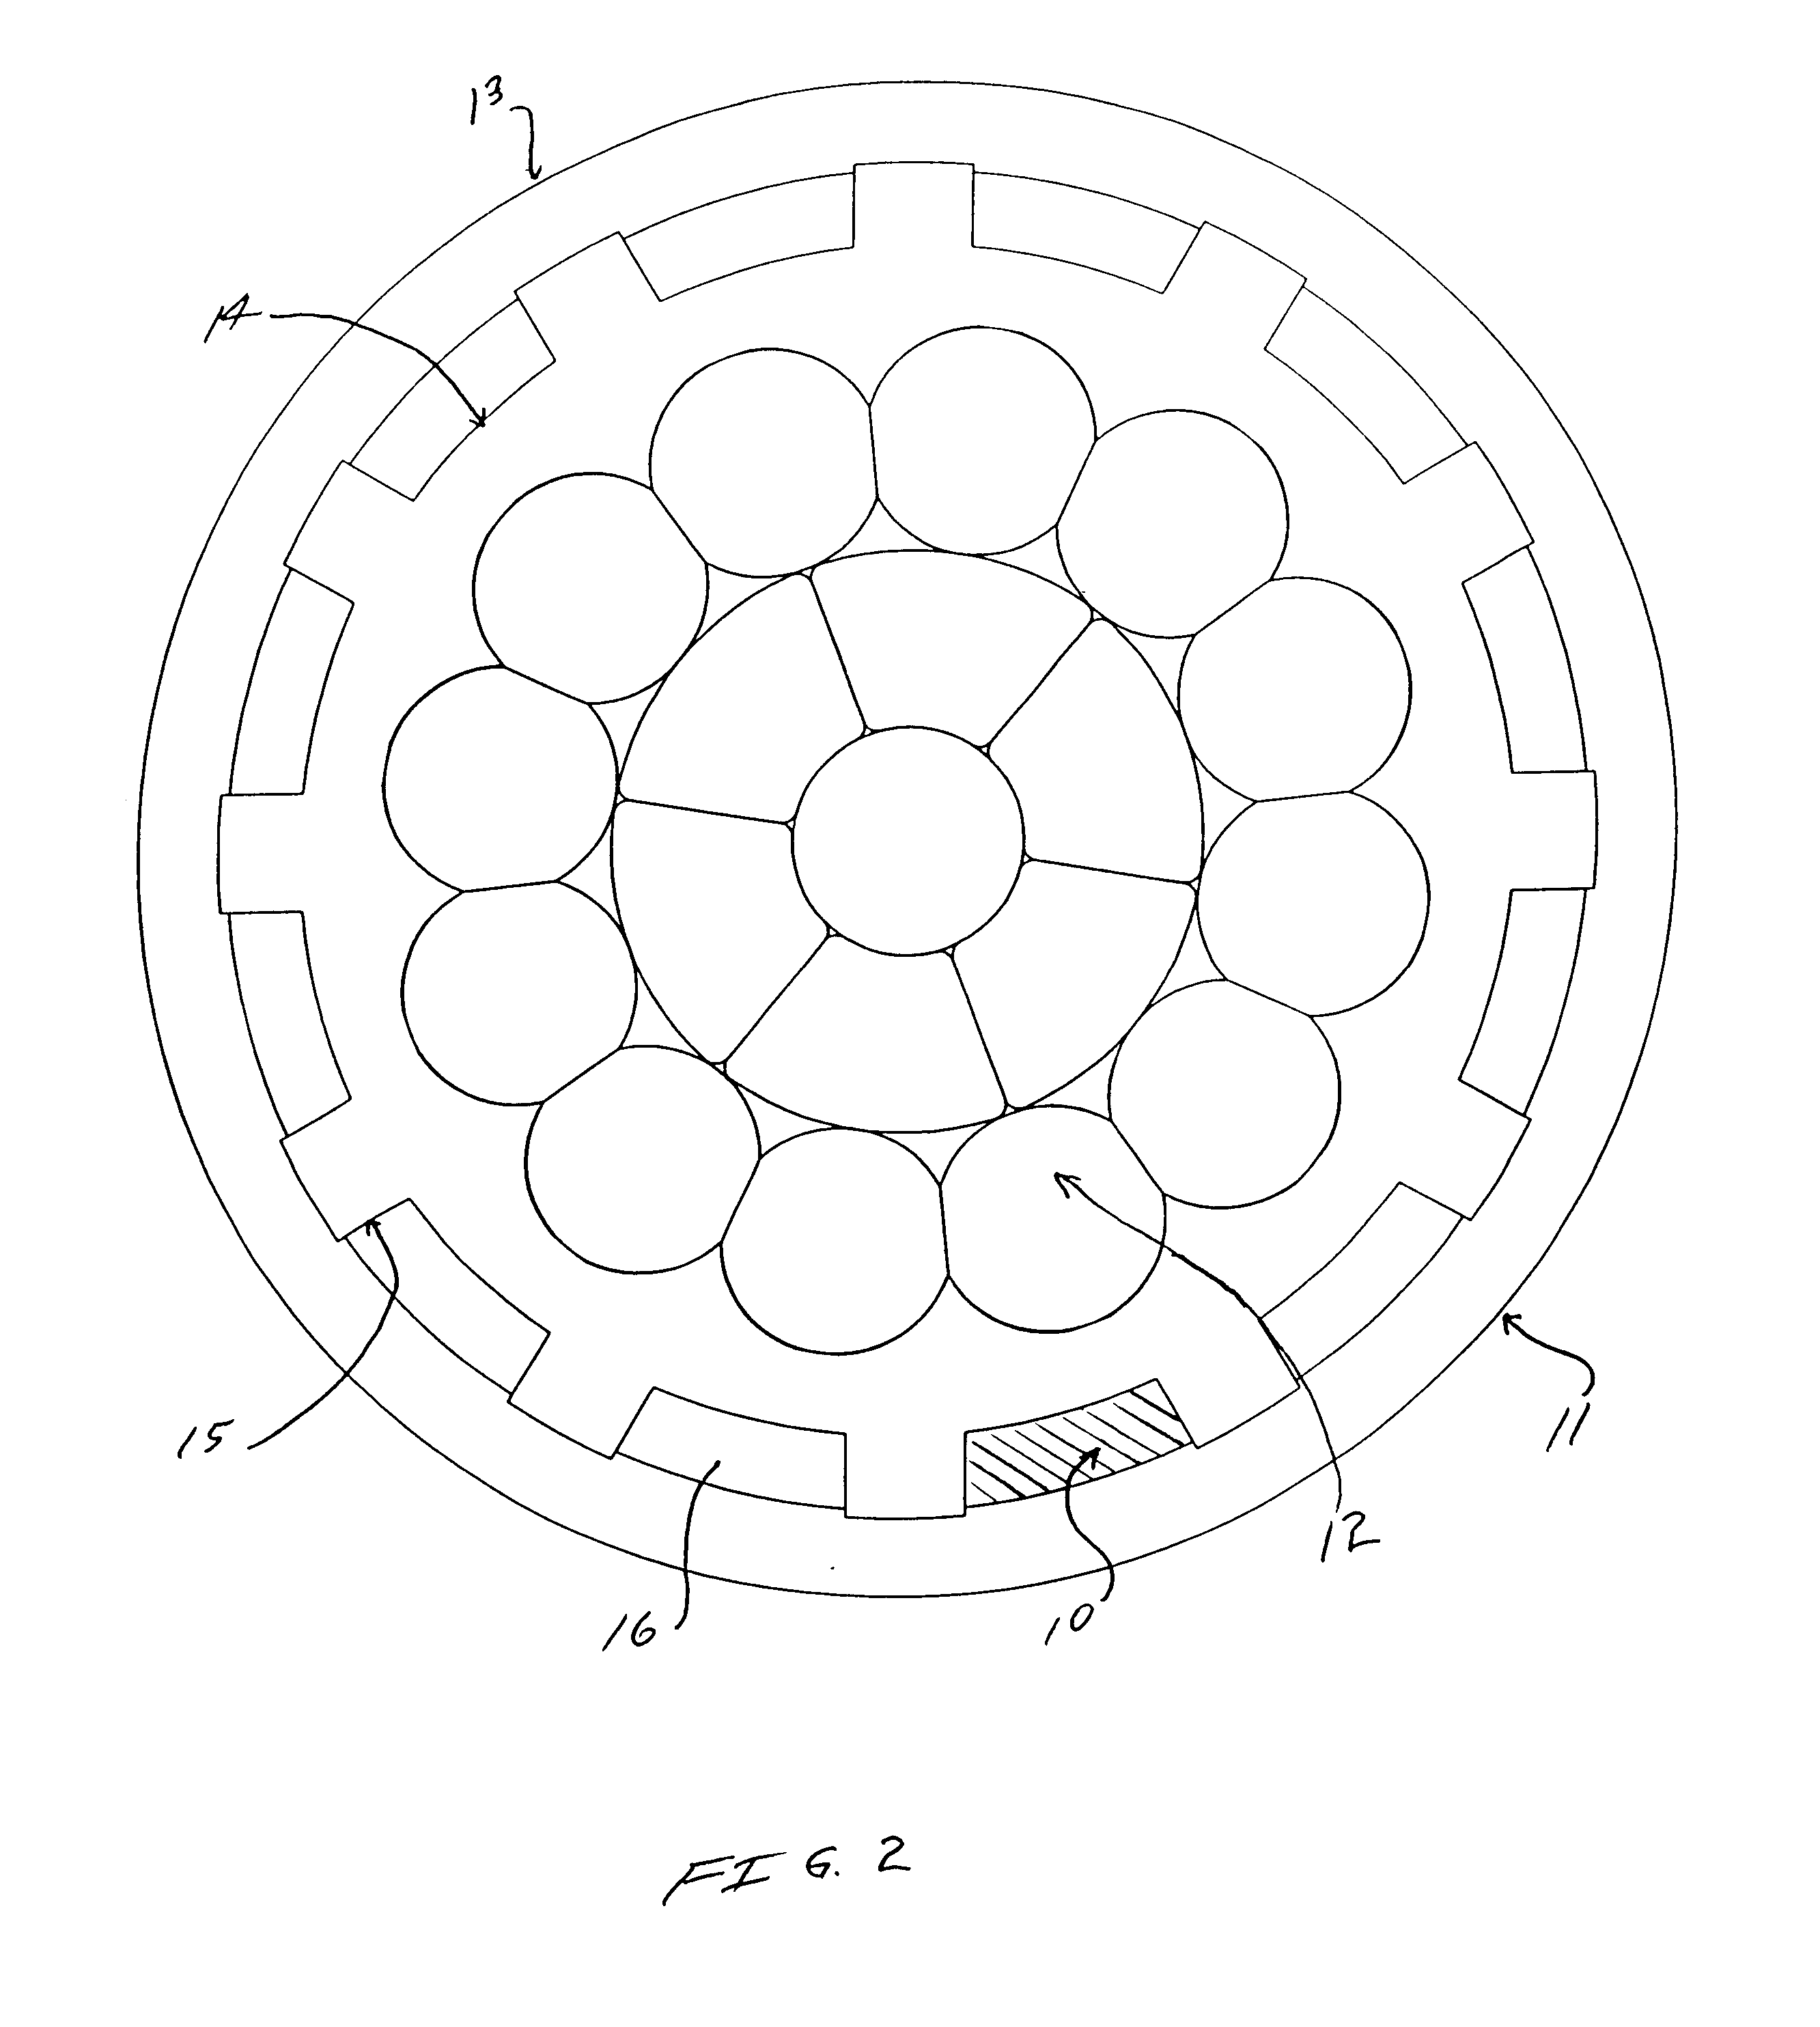 Self-sealing electrical cable having a finned inner layer